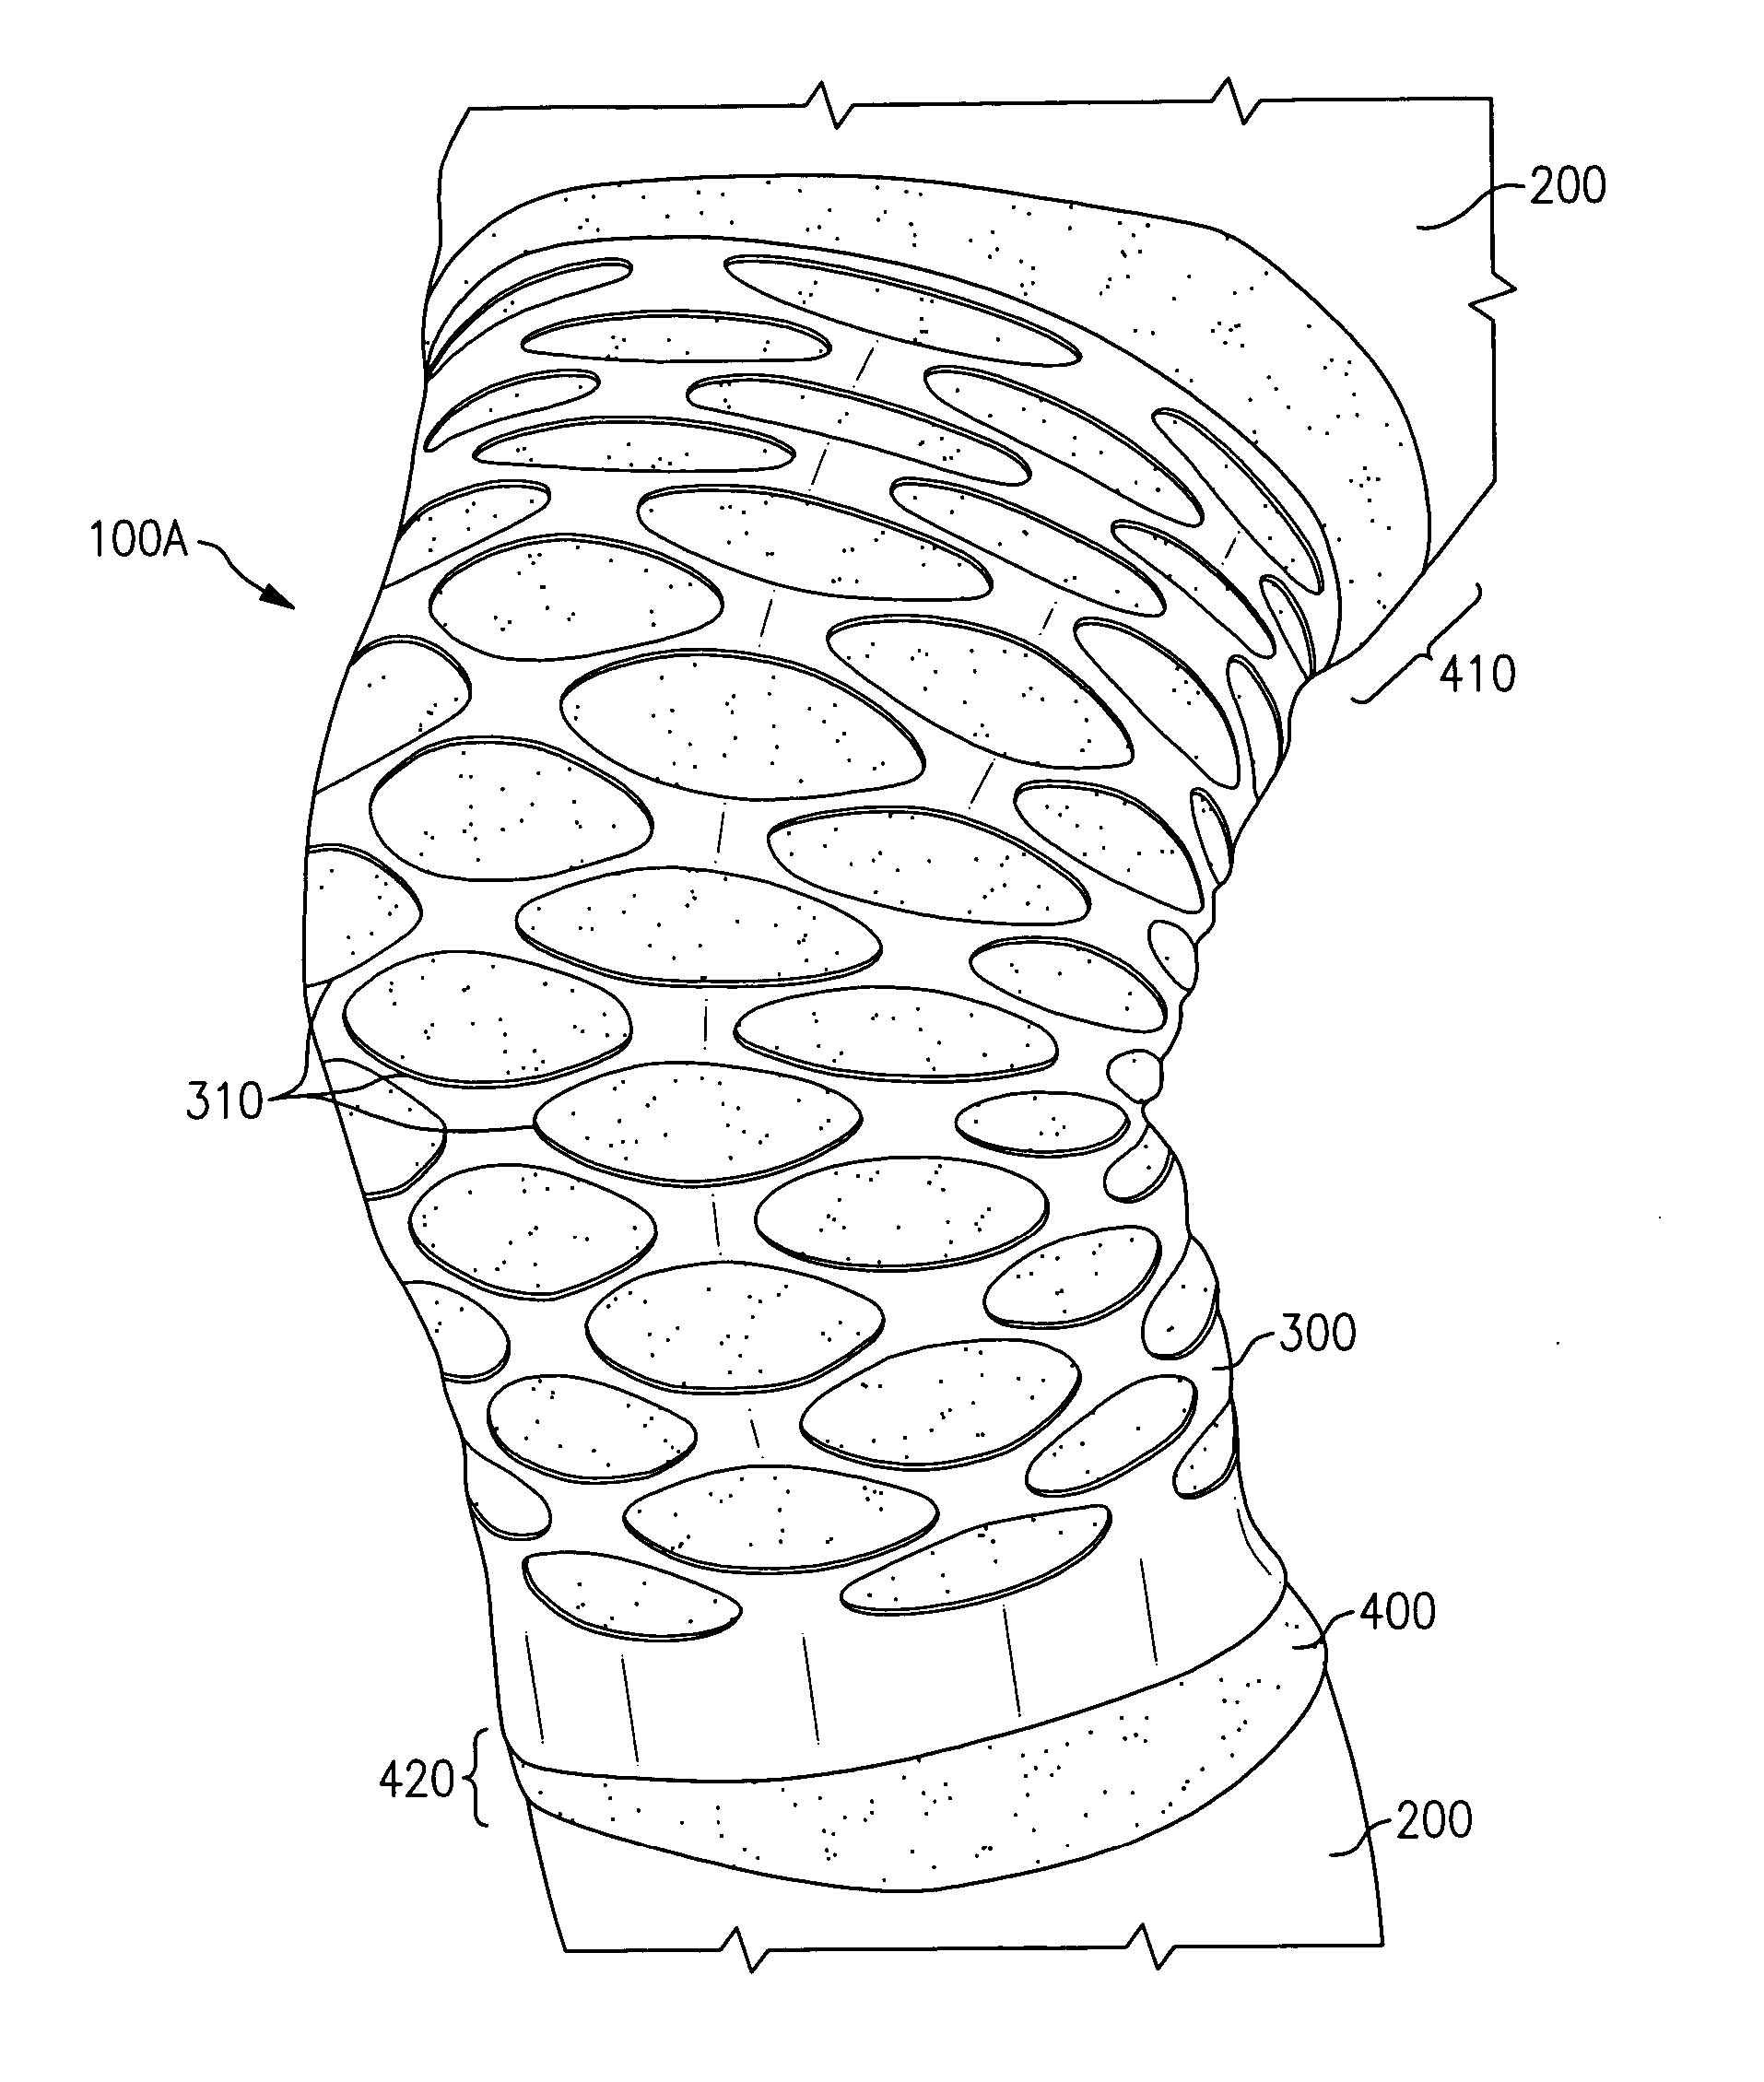 Orthopedic devices with compressive elastomer formed directly onto a base material